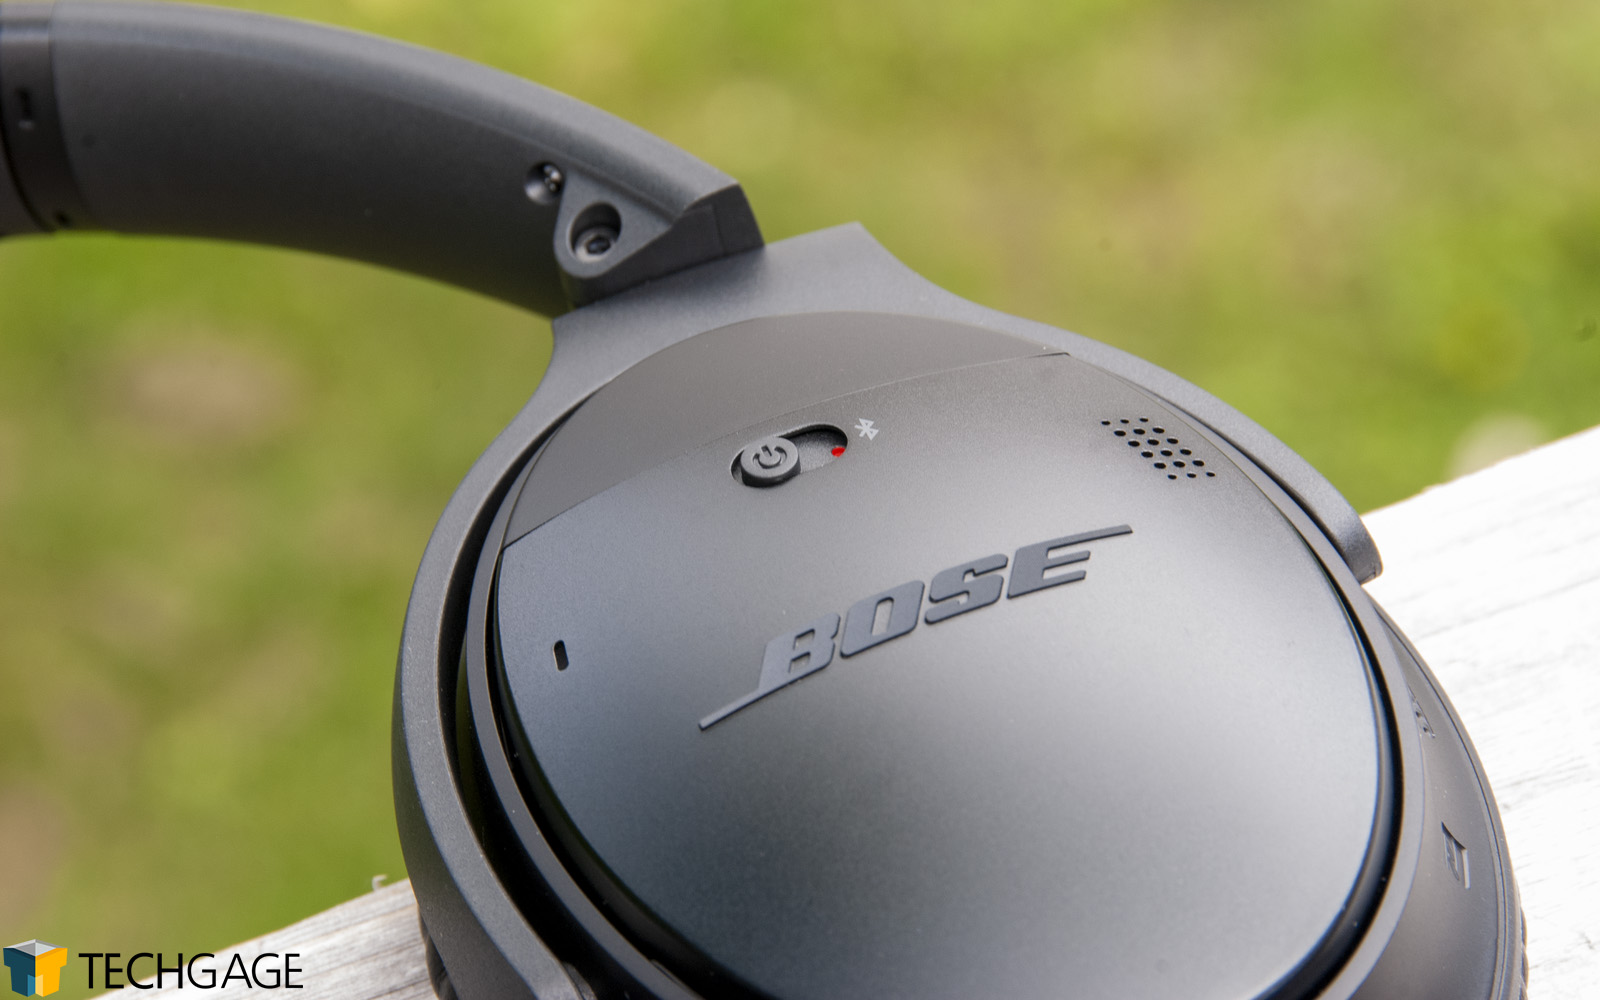 Sony WH-1000XM3 or Bose QC35 II, which to buy? - SoundGuys